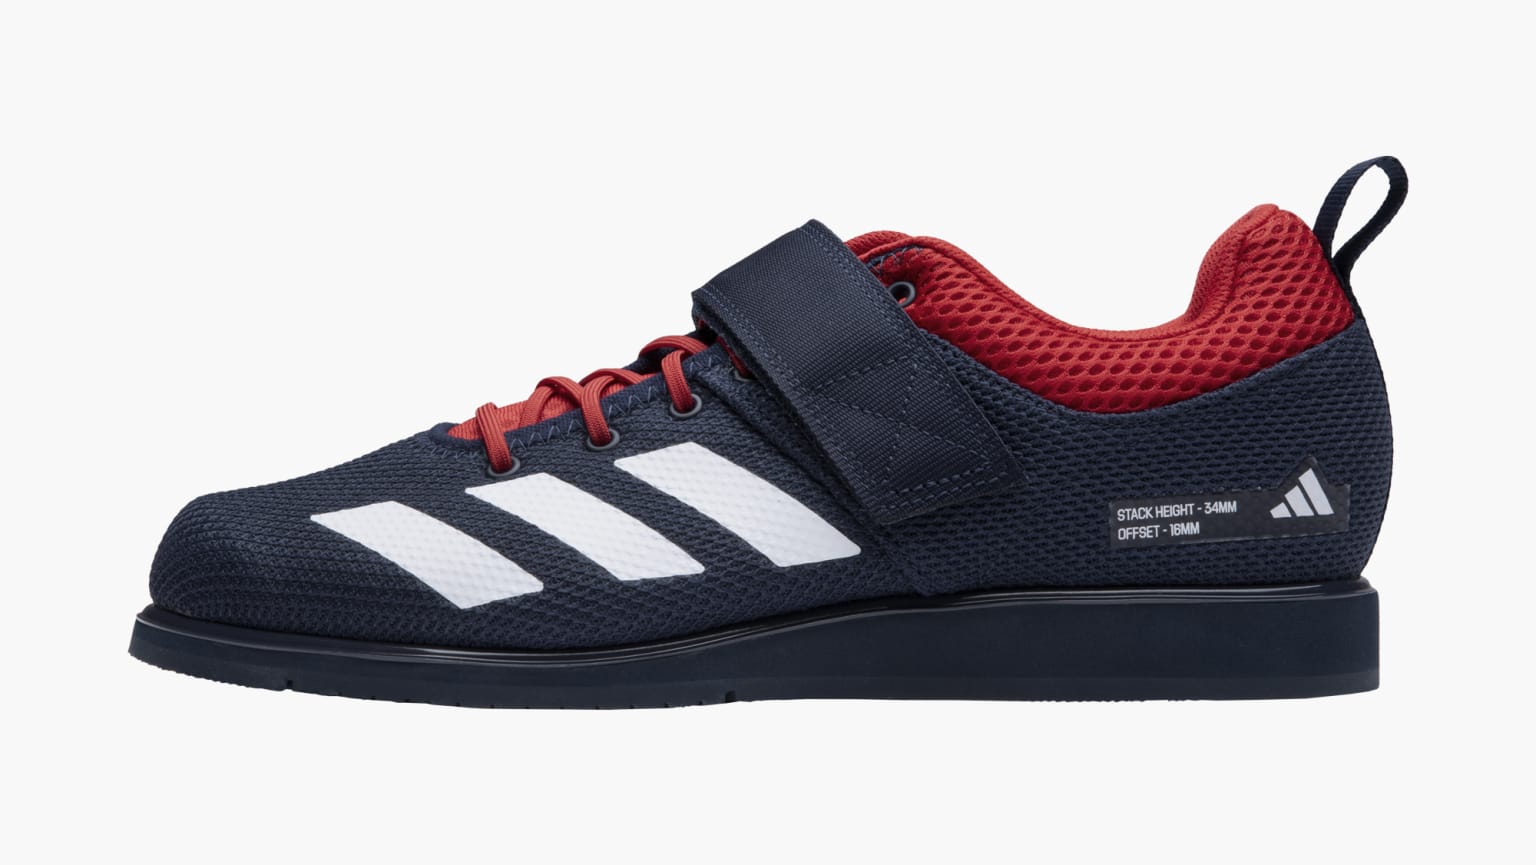 Recuerdo Palabra Anzai Adidas Powerlift 5 Weightlifting Shoes - Team Navy Blue 2 / FTWR White /  Better Scarlet | Rogue Fitness APO